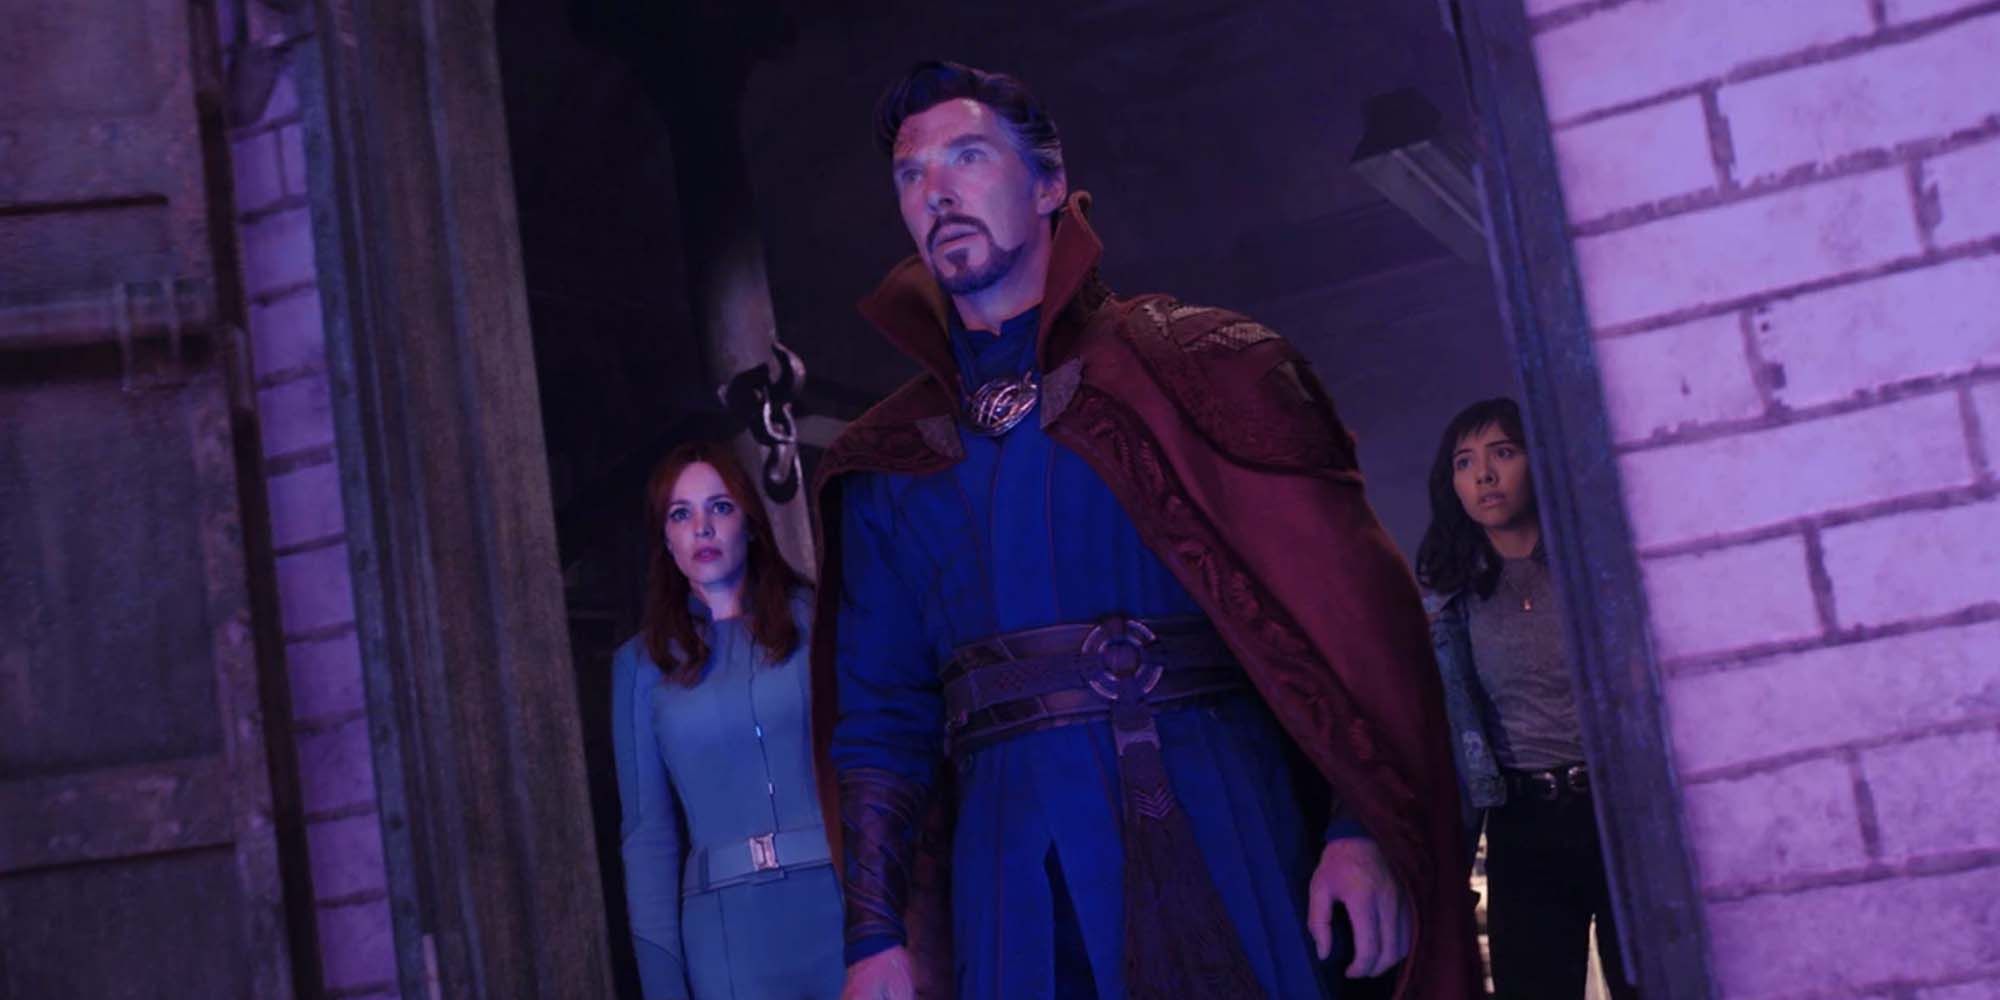 Doctor Strange in the Multiverse of Madness with Rachel McAdams, Benedict Cumberbatch, and Xochitl Gomez.